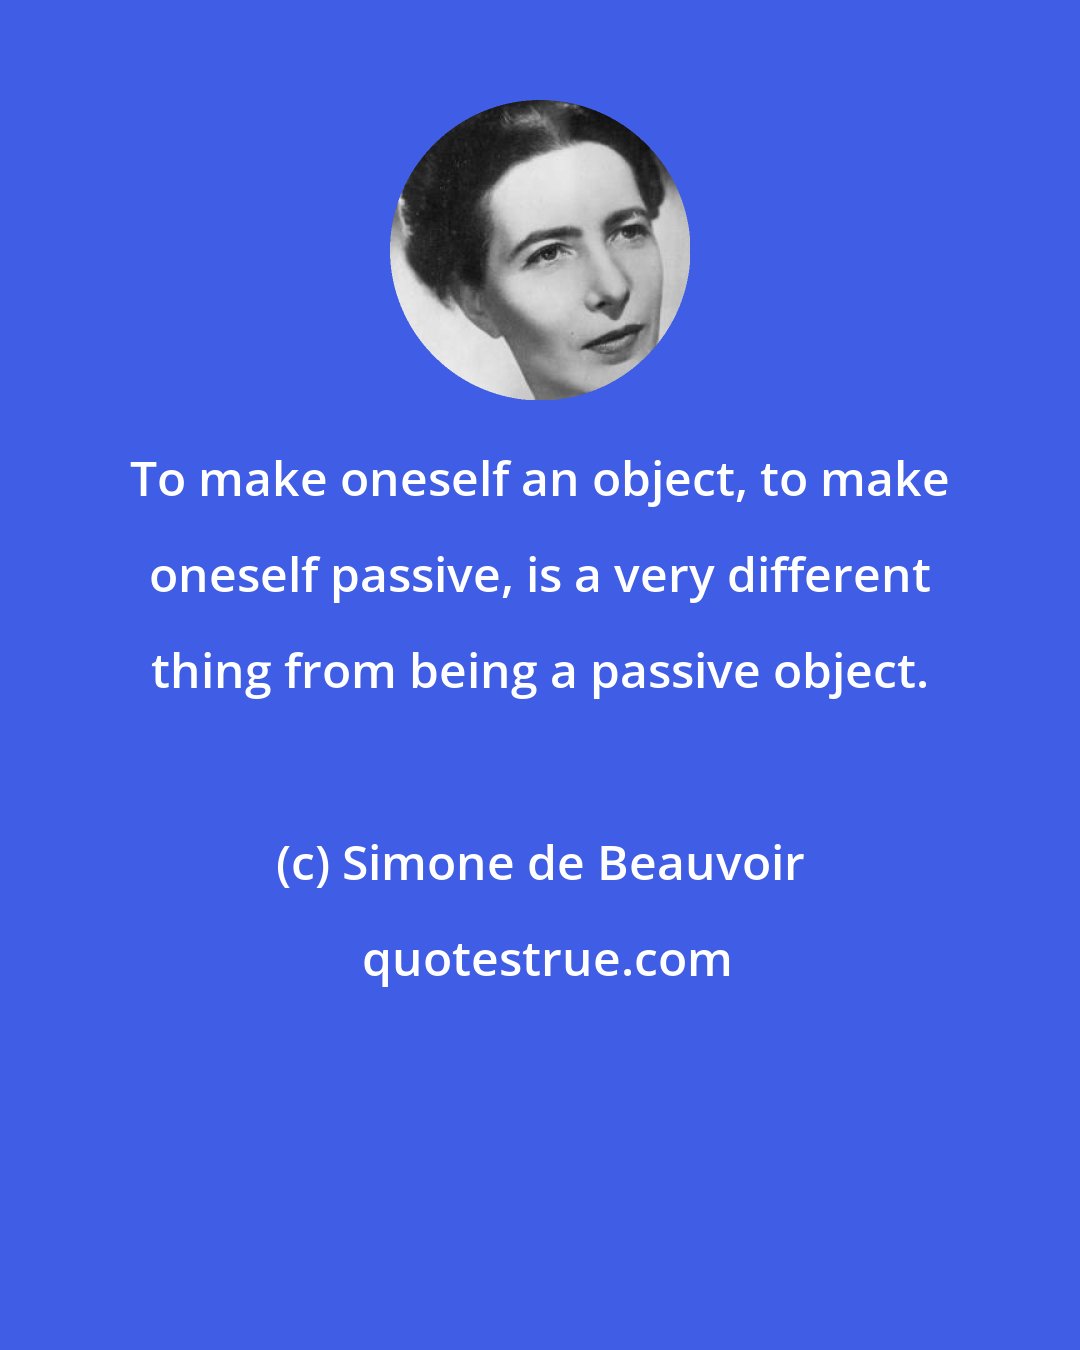 Simone de Beauvoir: To make oneself an object, to make oneself passive, is a very different thing from being a passive object.